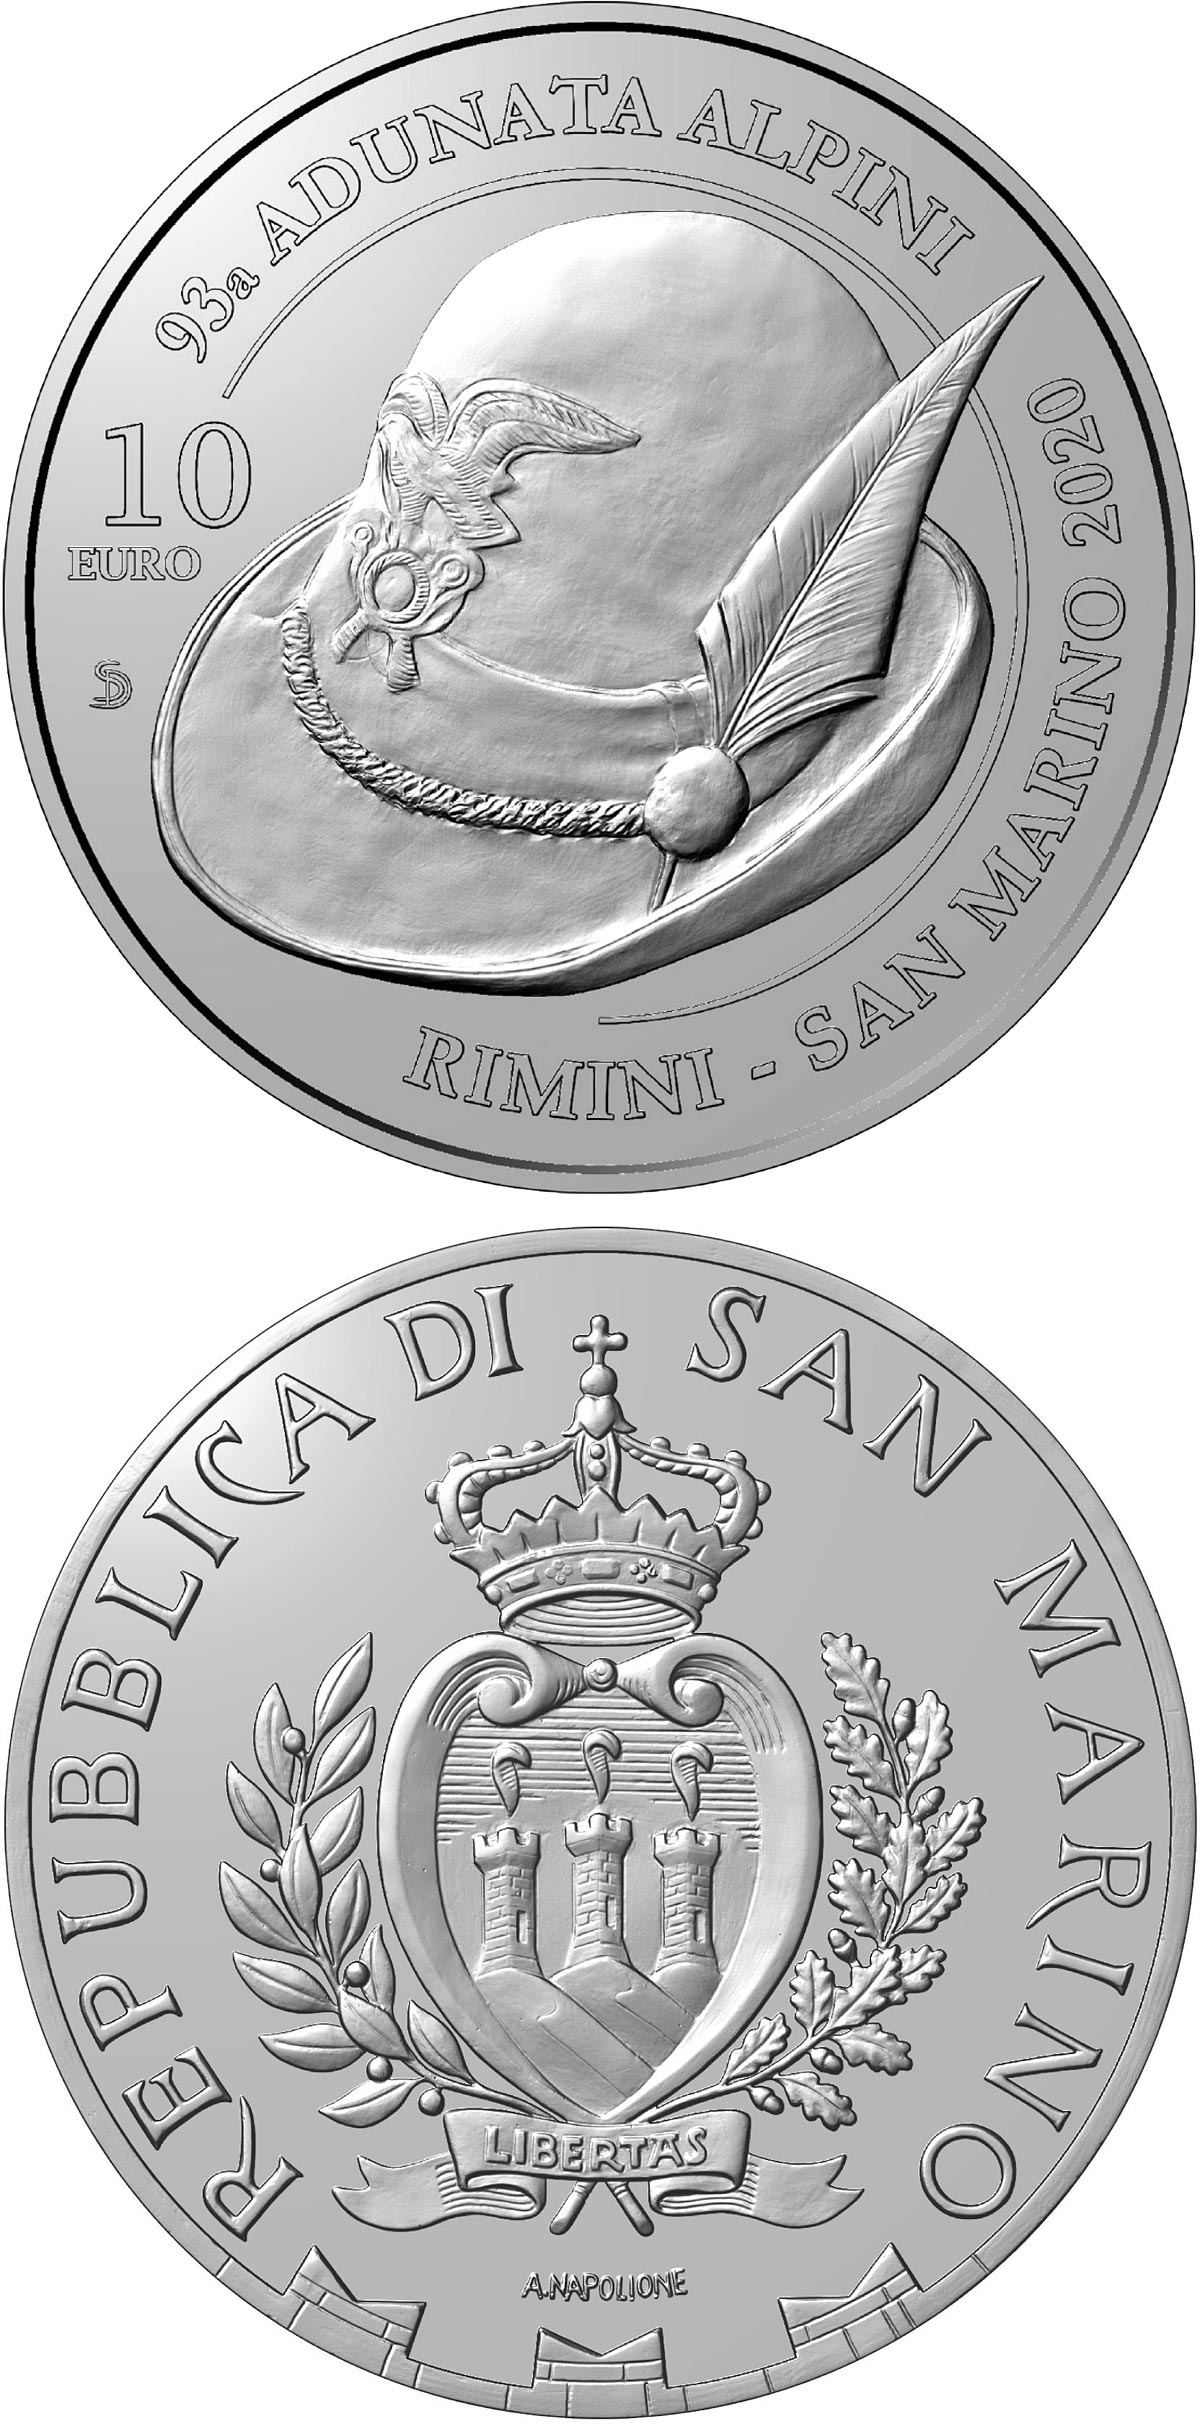 Image of 10 euro coin - 93rd National Alpini Assembly Rimini | San Marino 2020.  The Silver coin is of Proof quality.